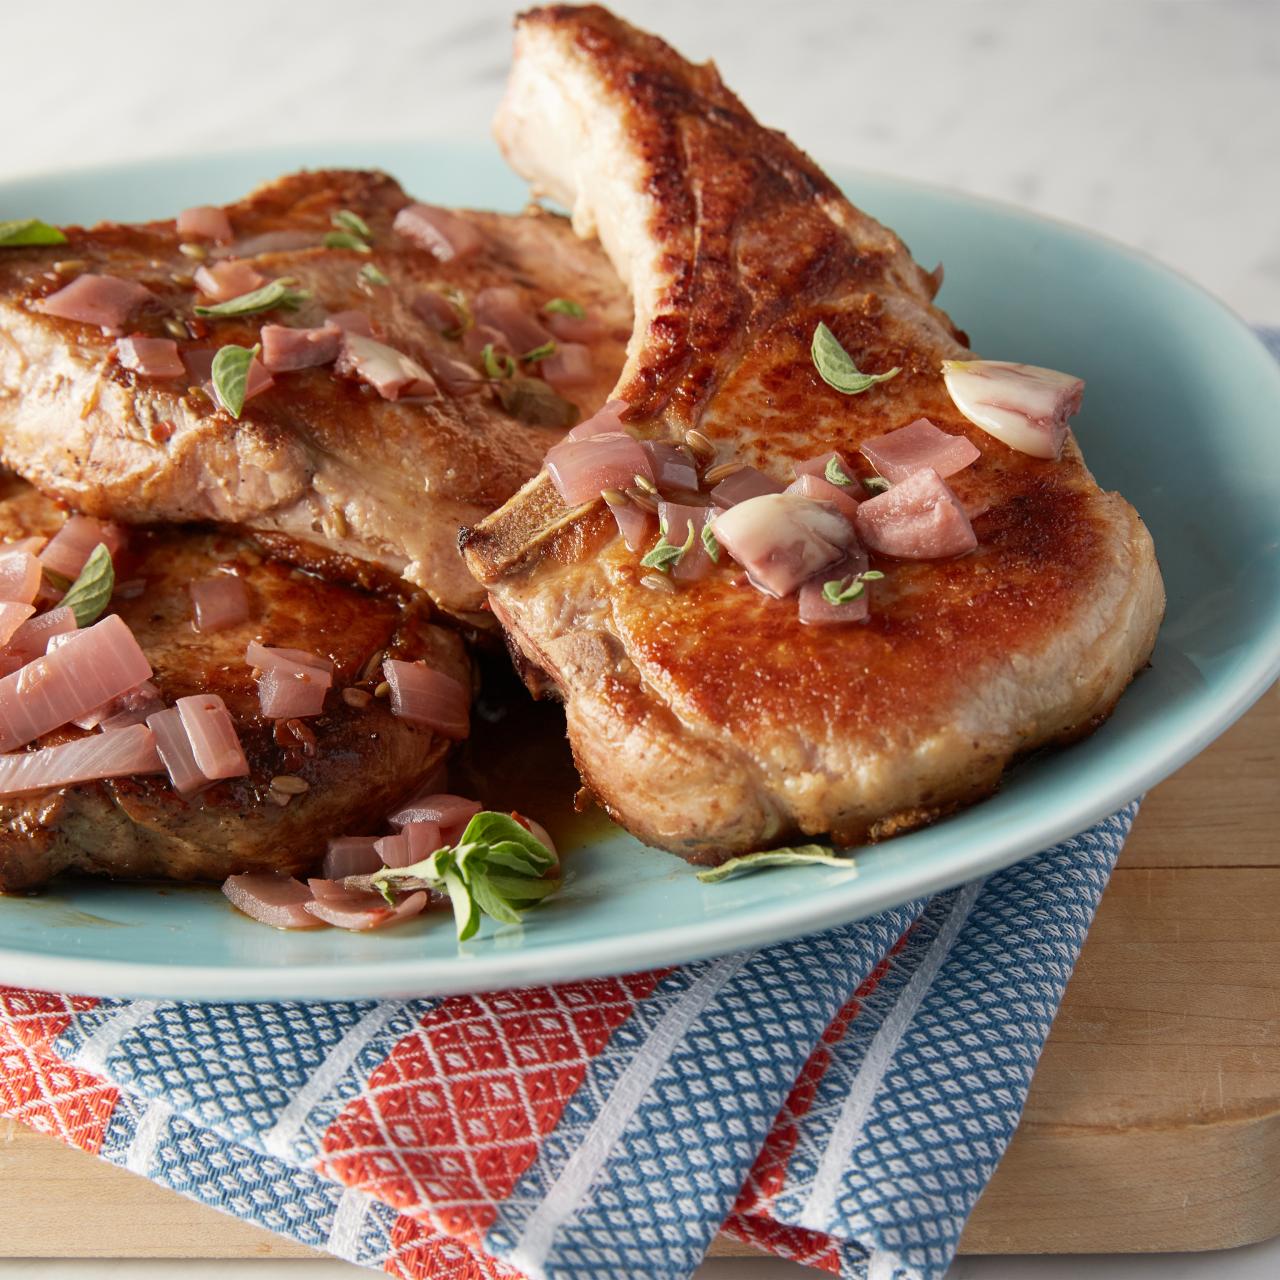 My Easy Pan Roasted Pork Chops Recipe From the Rachel Ray Show